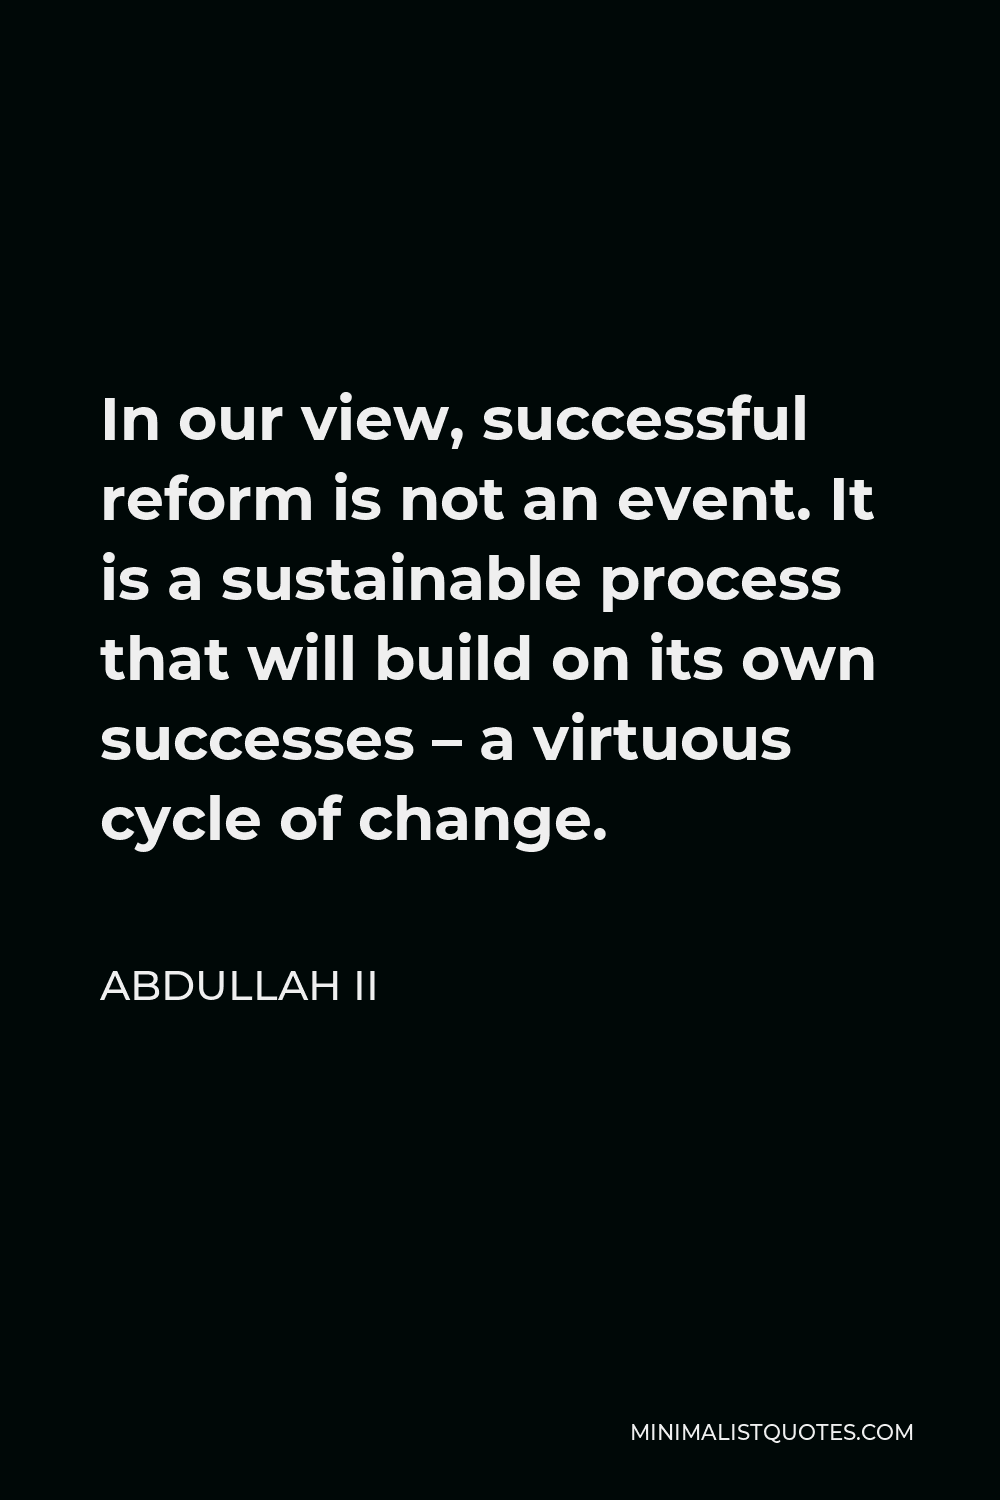 Abdullah II Quote - In our view, successful reform is not an event. It is a sustainable process that will build on its own successes – a virtuous cycle of change.